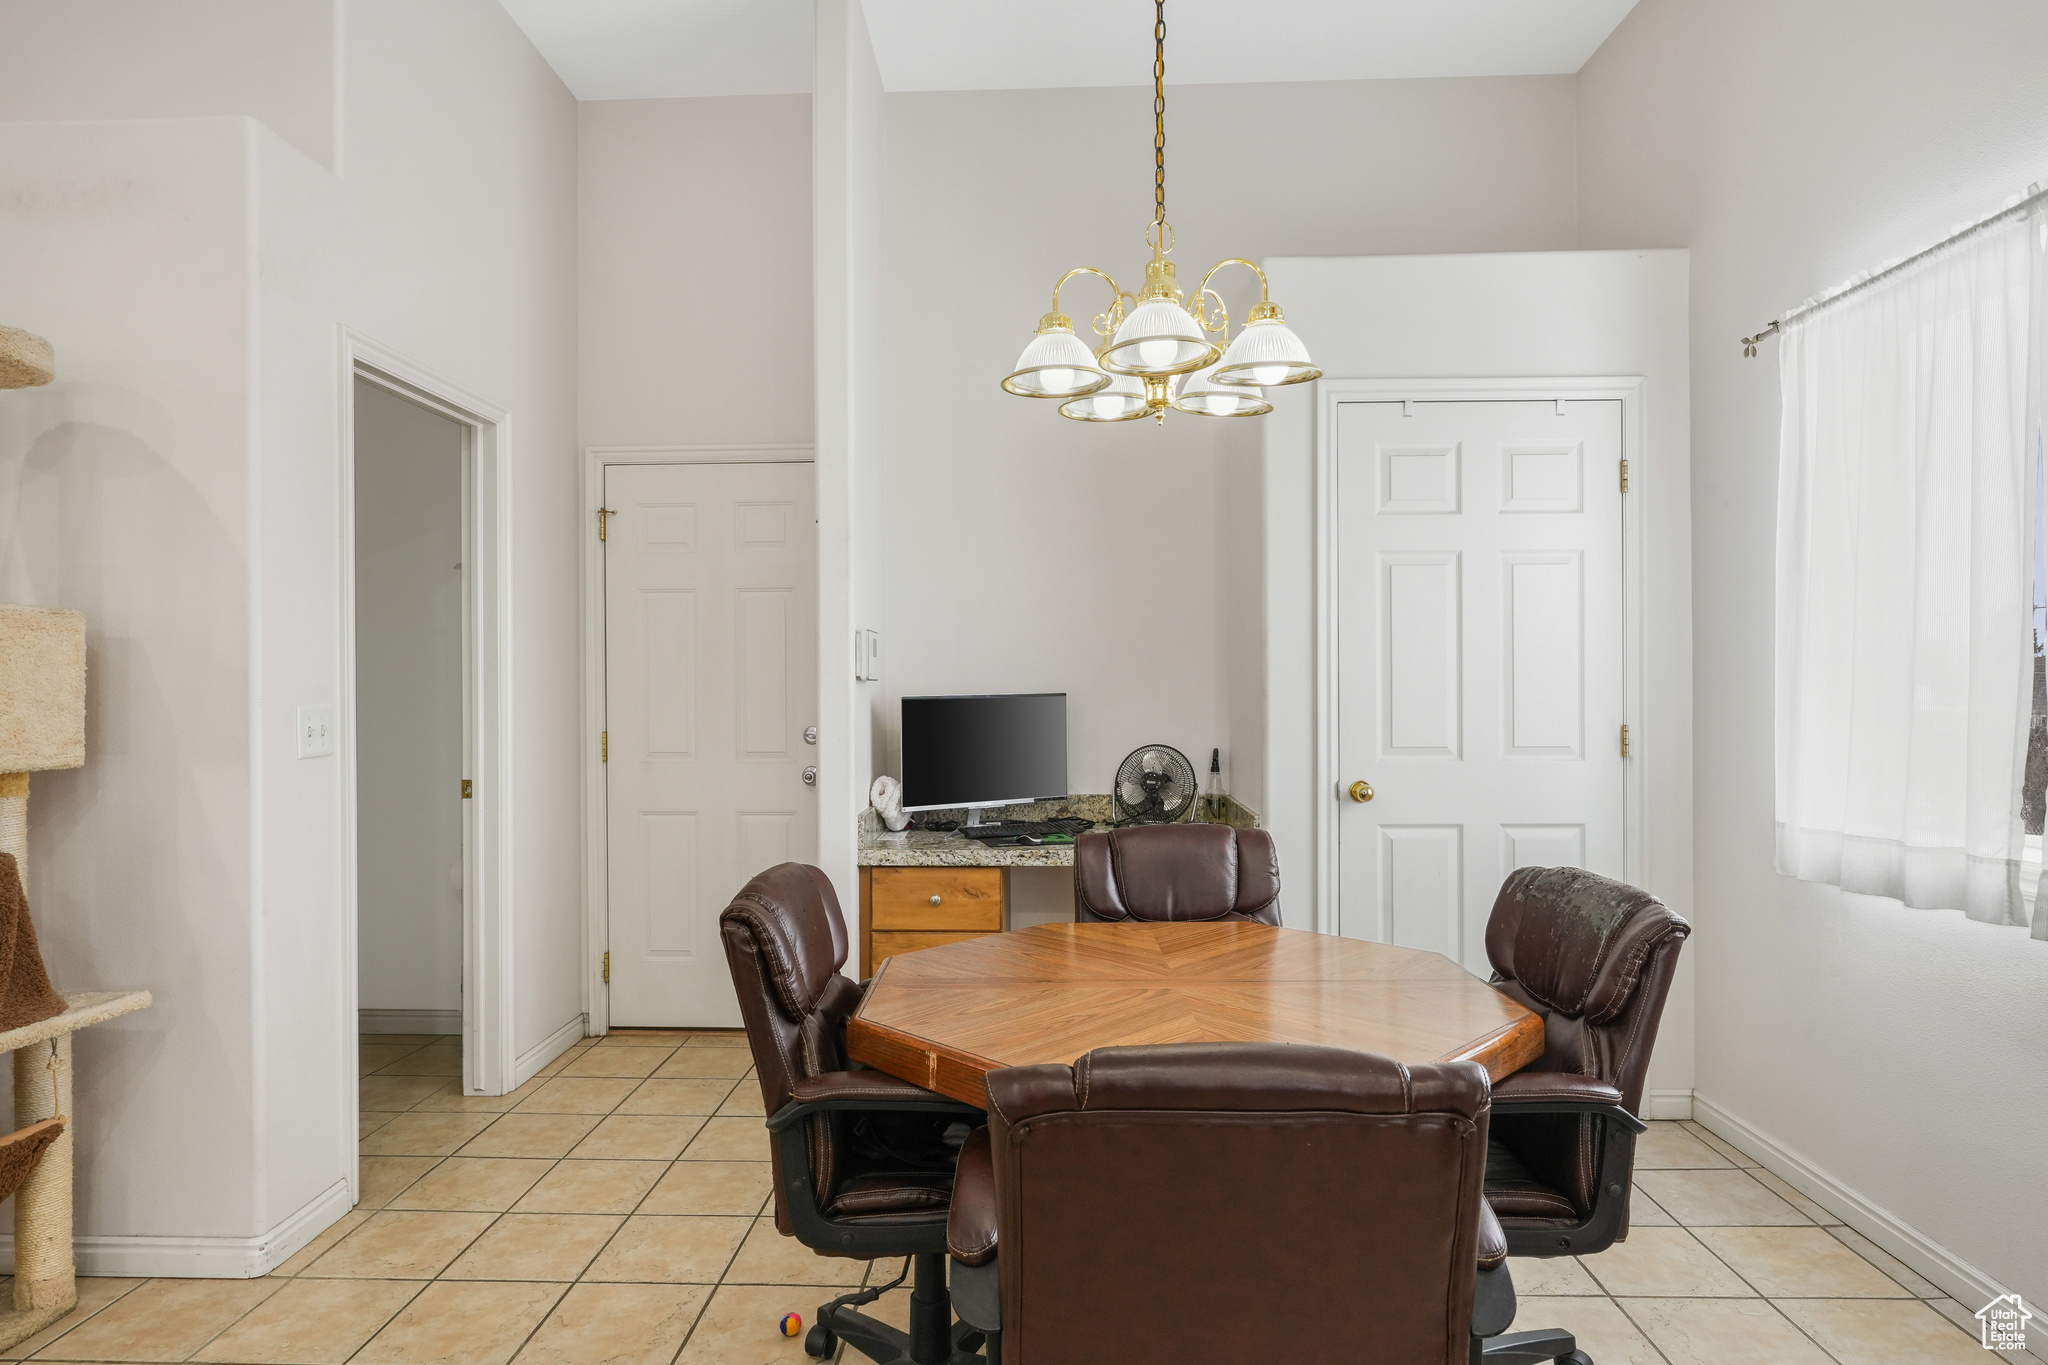 Office space featuring a chandelier, a high ceiling, and light tile floors